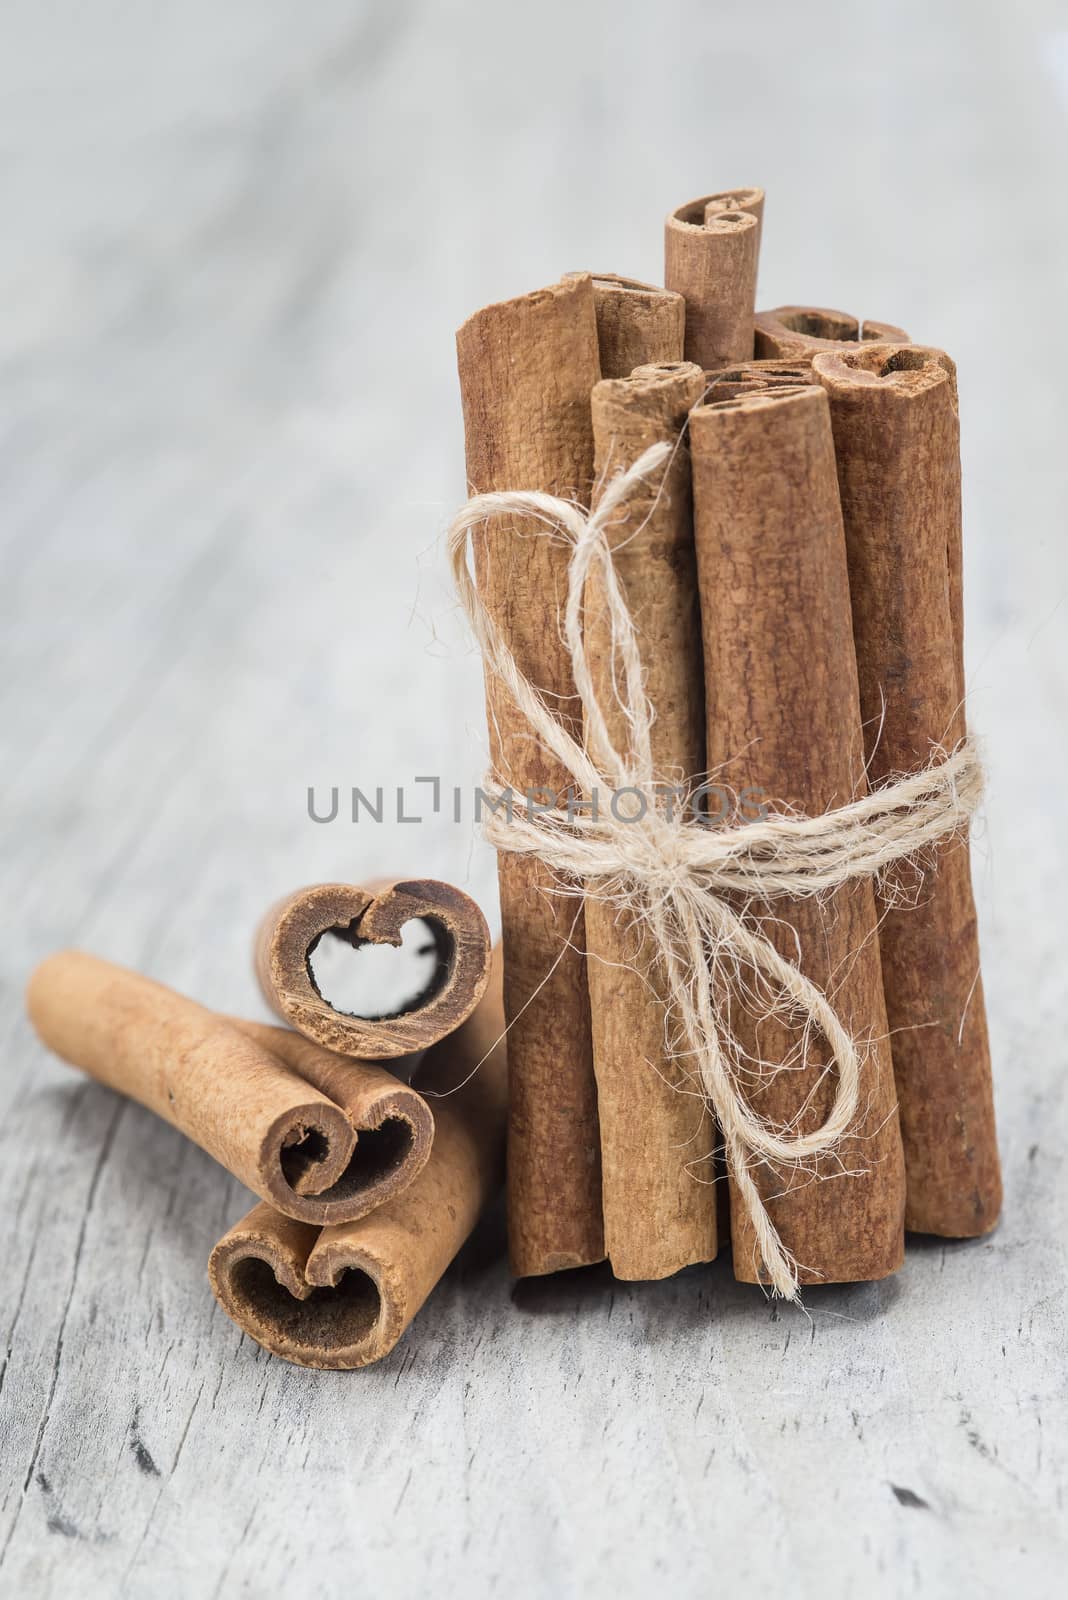 Cinnamon sticks on an old wooden table background